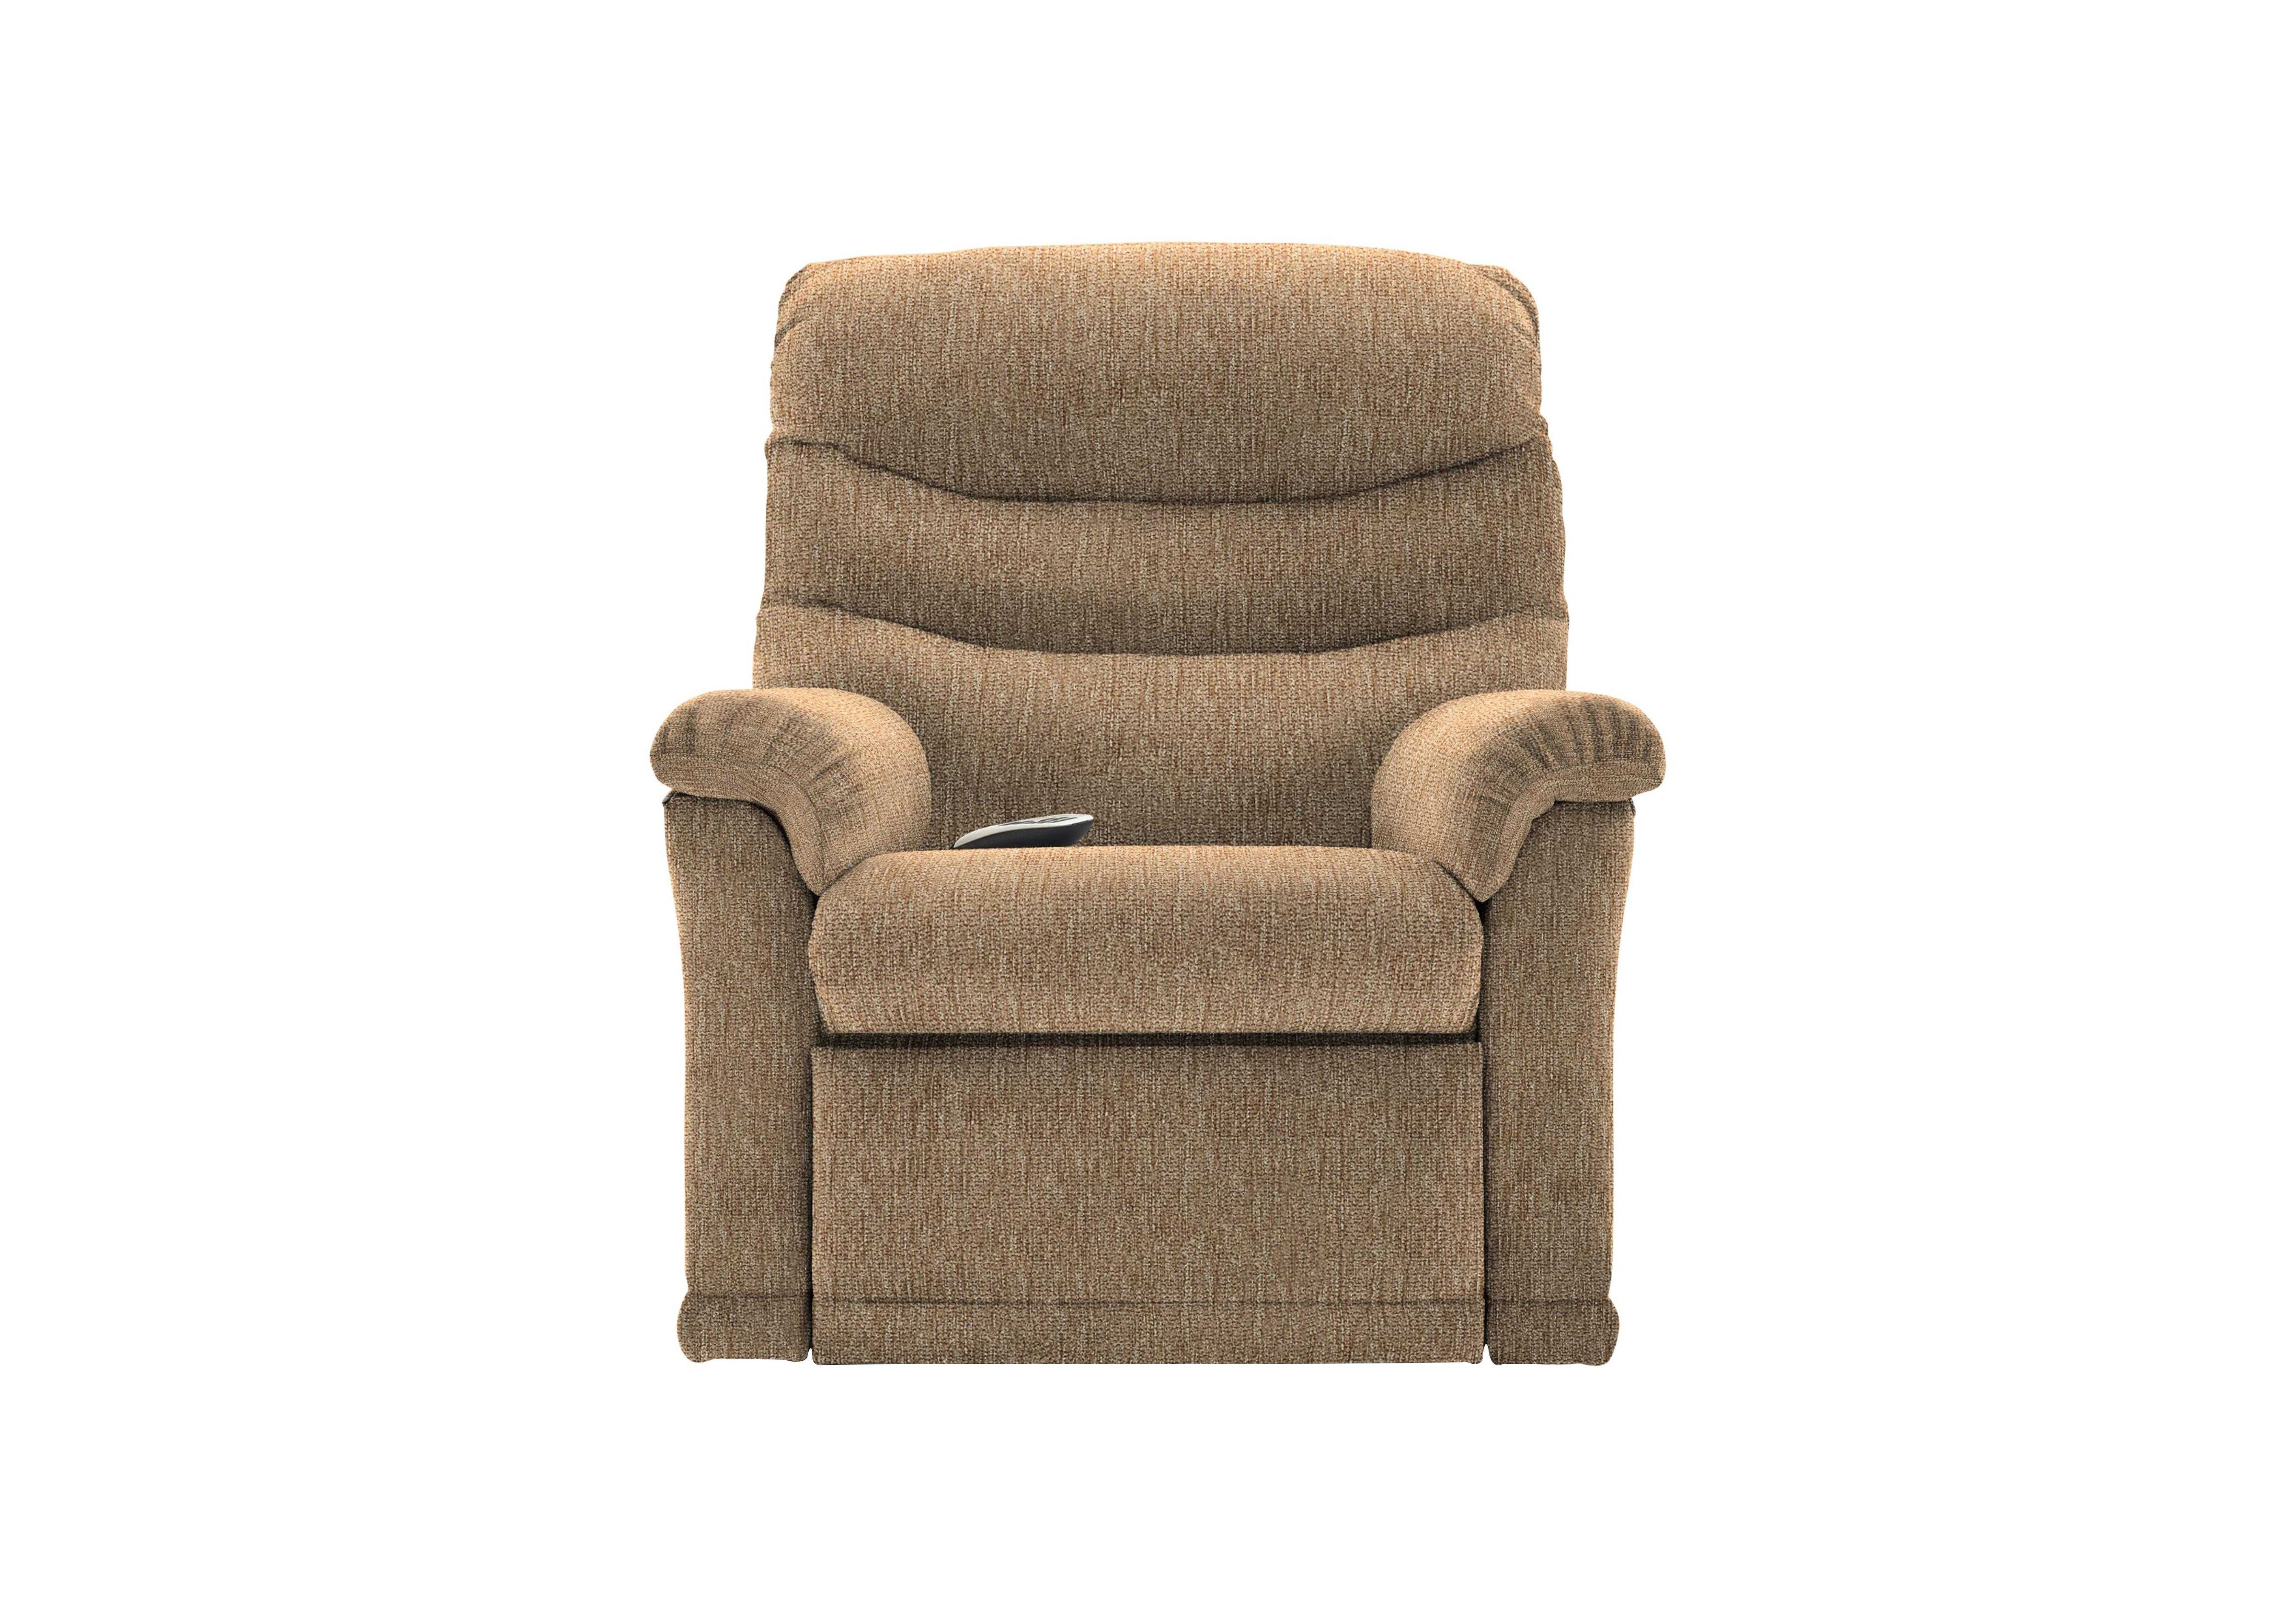 Malvern Fabric Rise and Recline Armchair in A070 Boucle Cocoa on Furniture Village